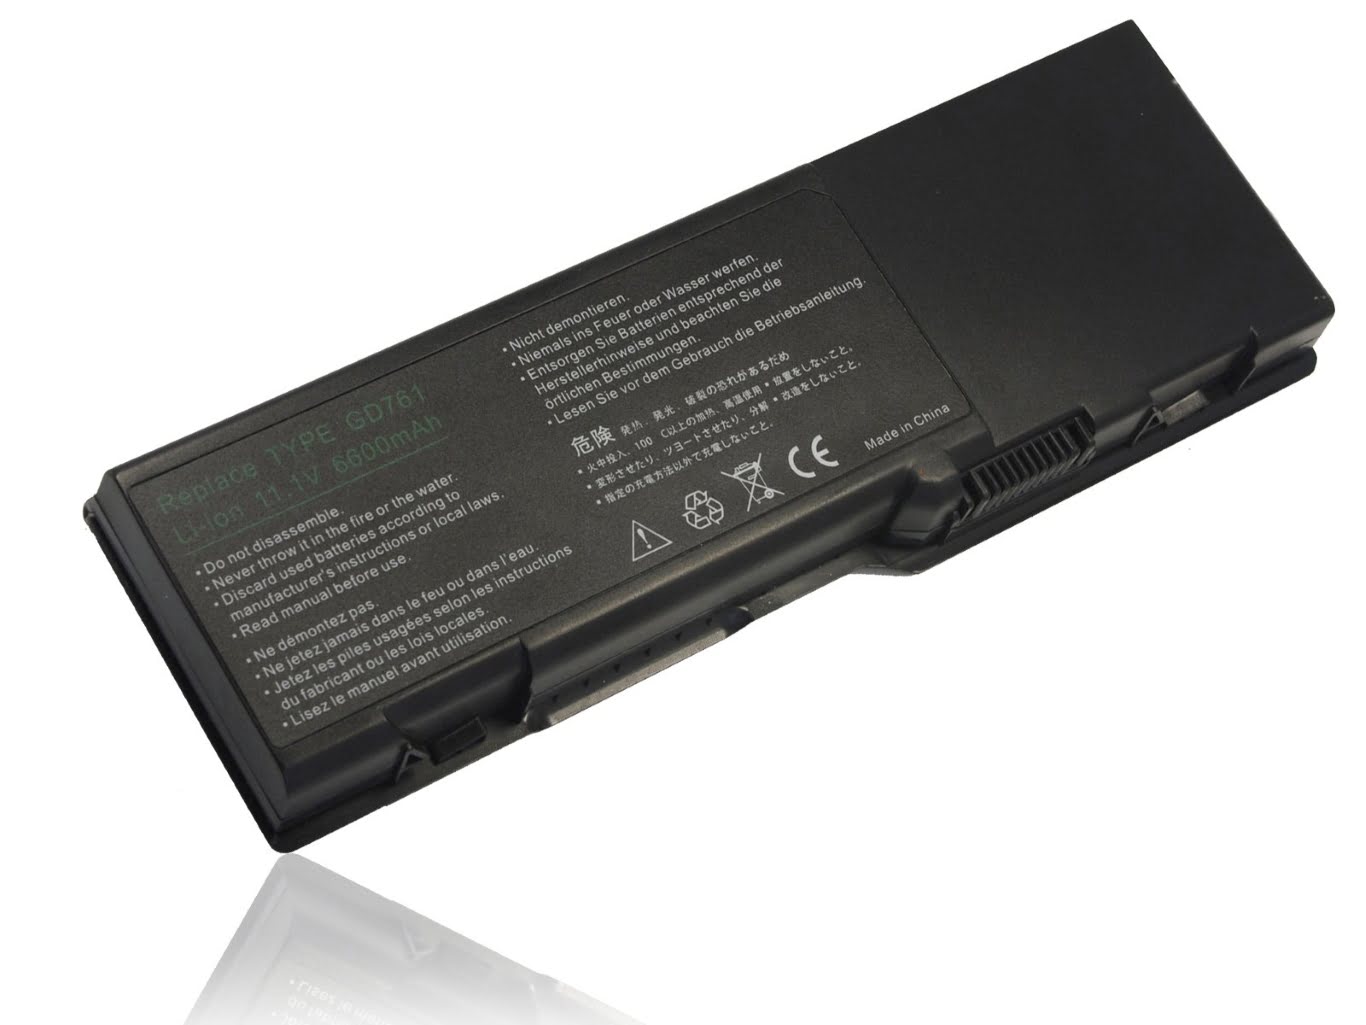 Dell 0cr174, 0ud260 Laptop Battery For Inspiron 1501, Inspiron 6400 replacement